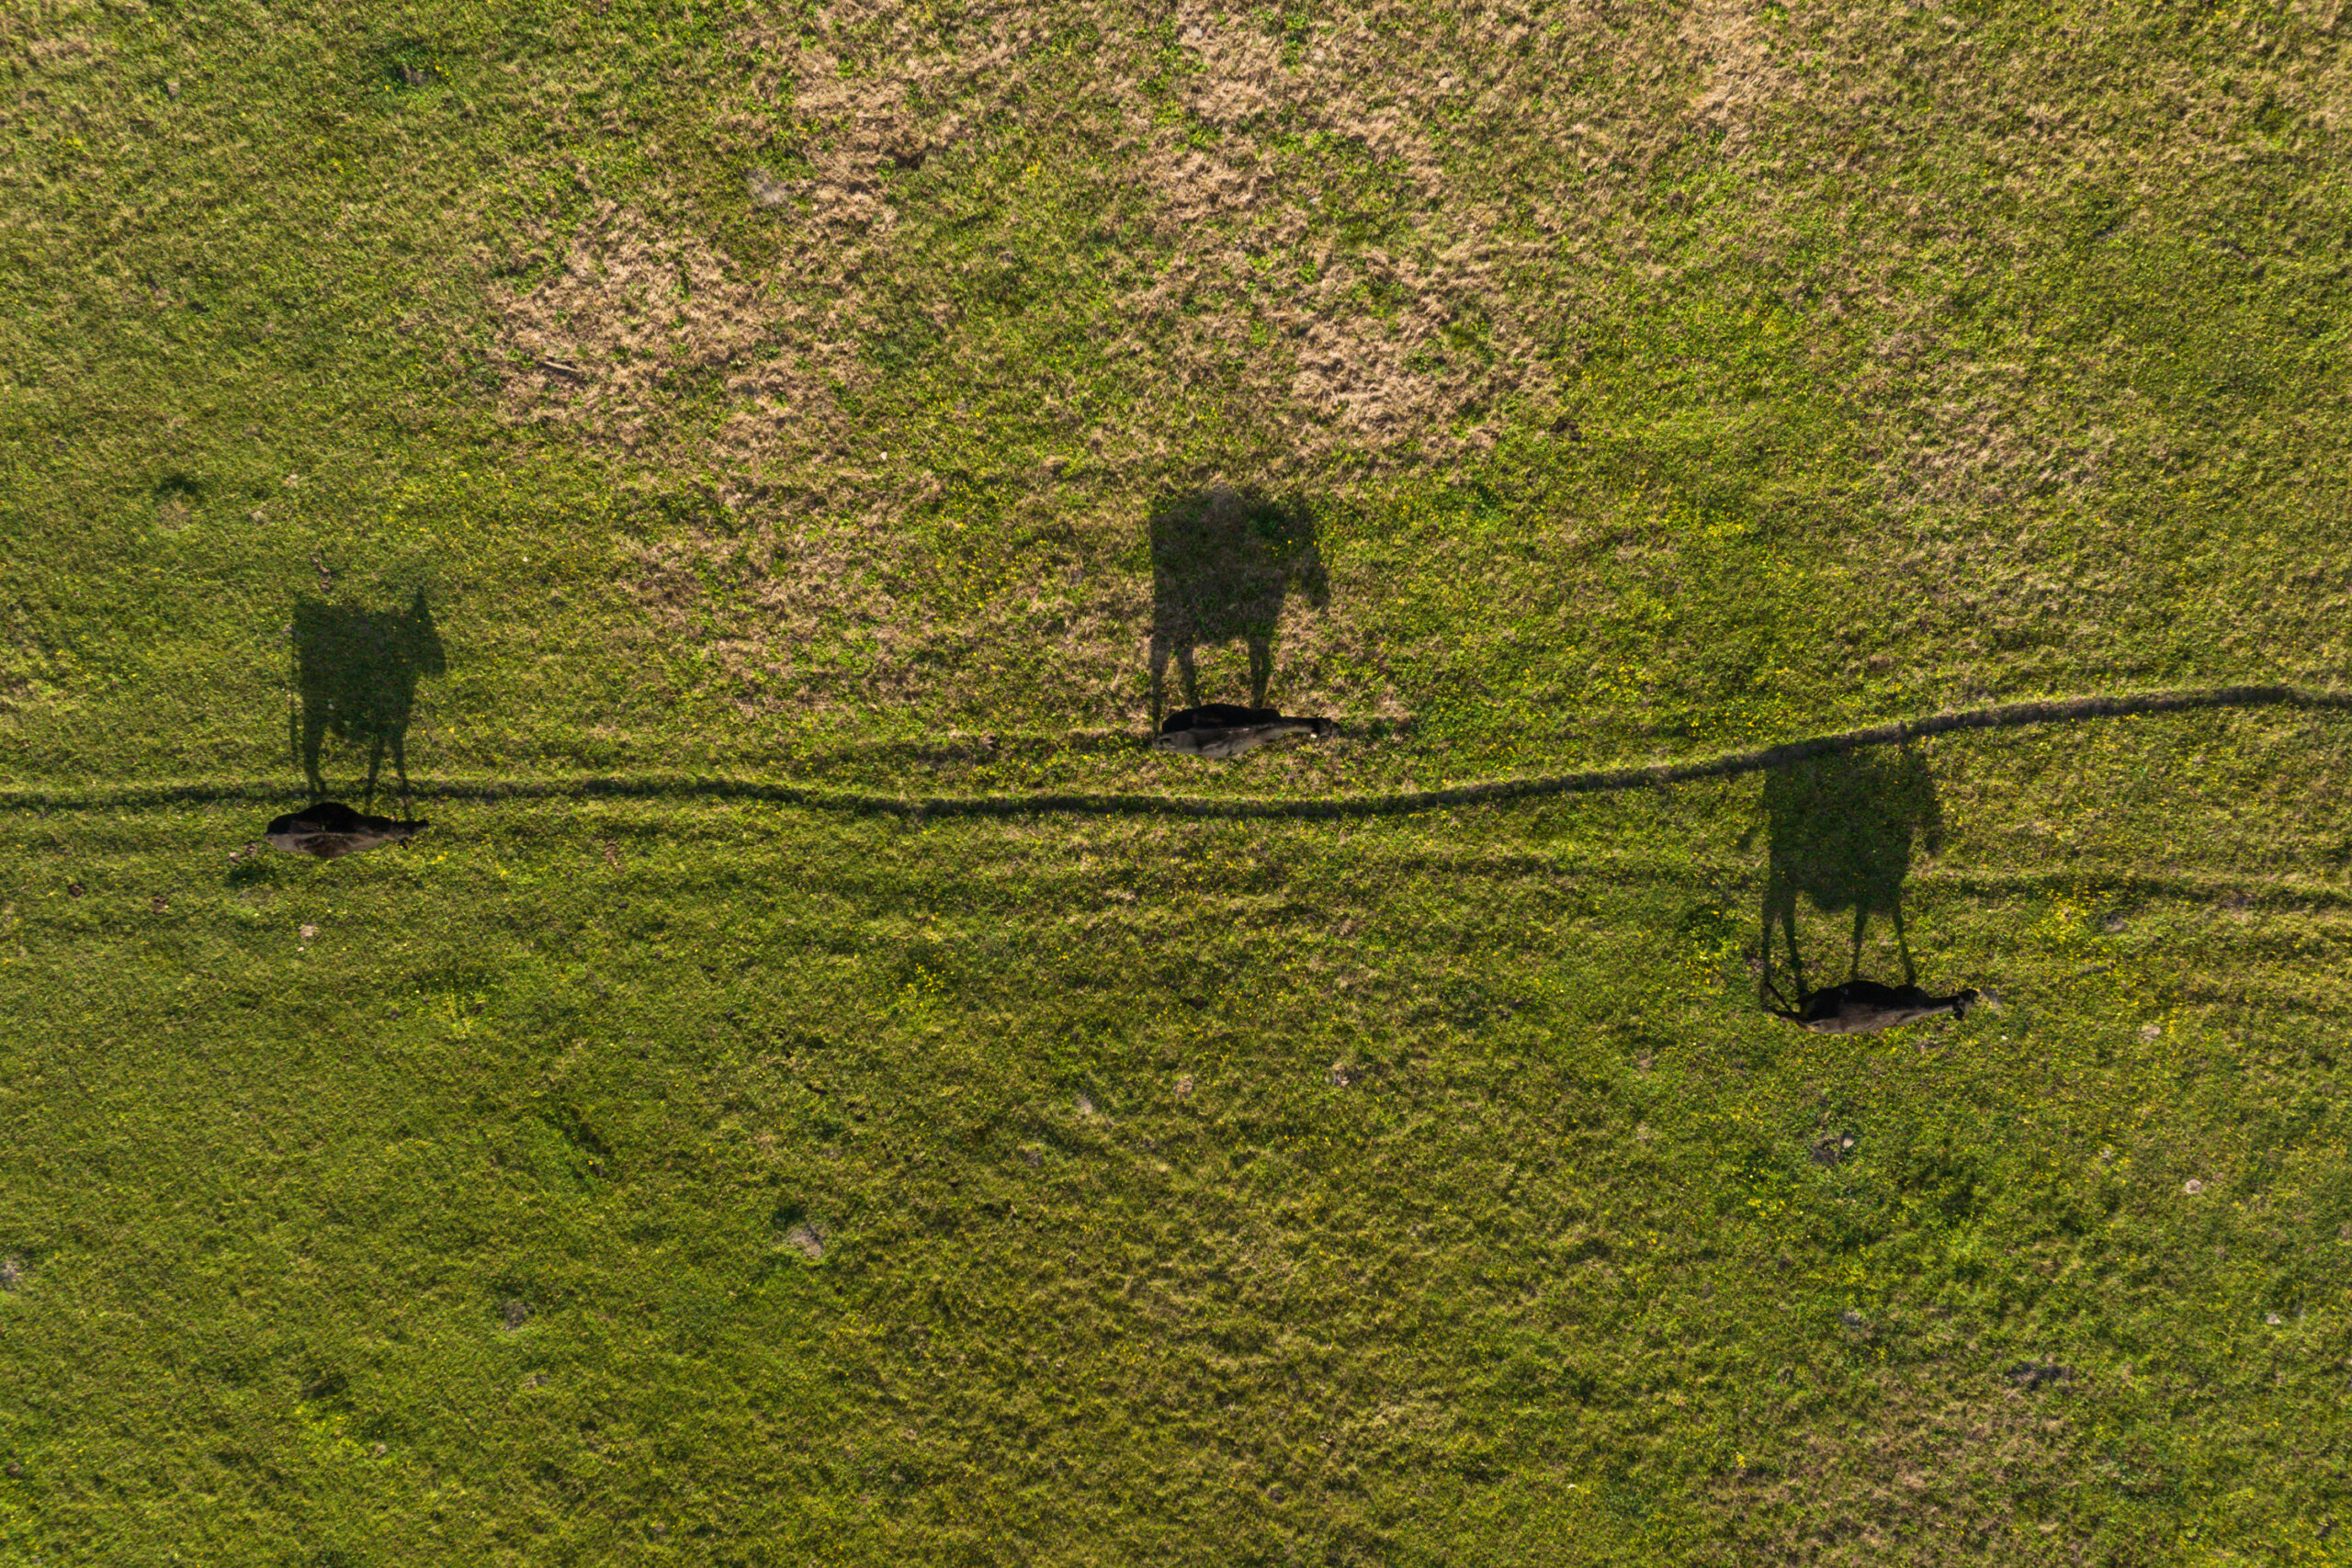 Overhead view of cattle walking a worn path